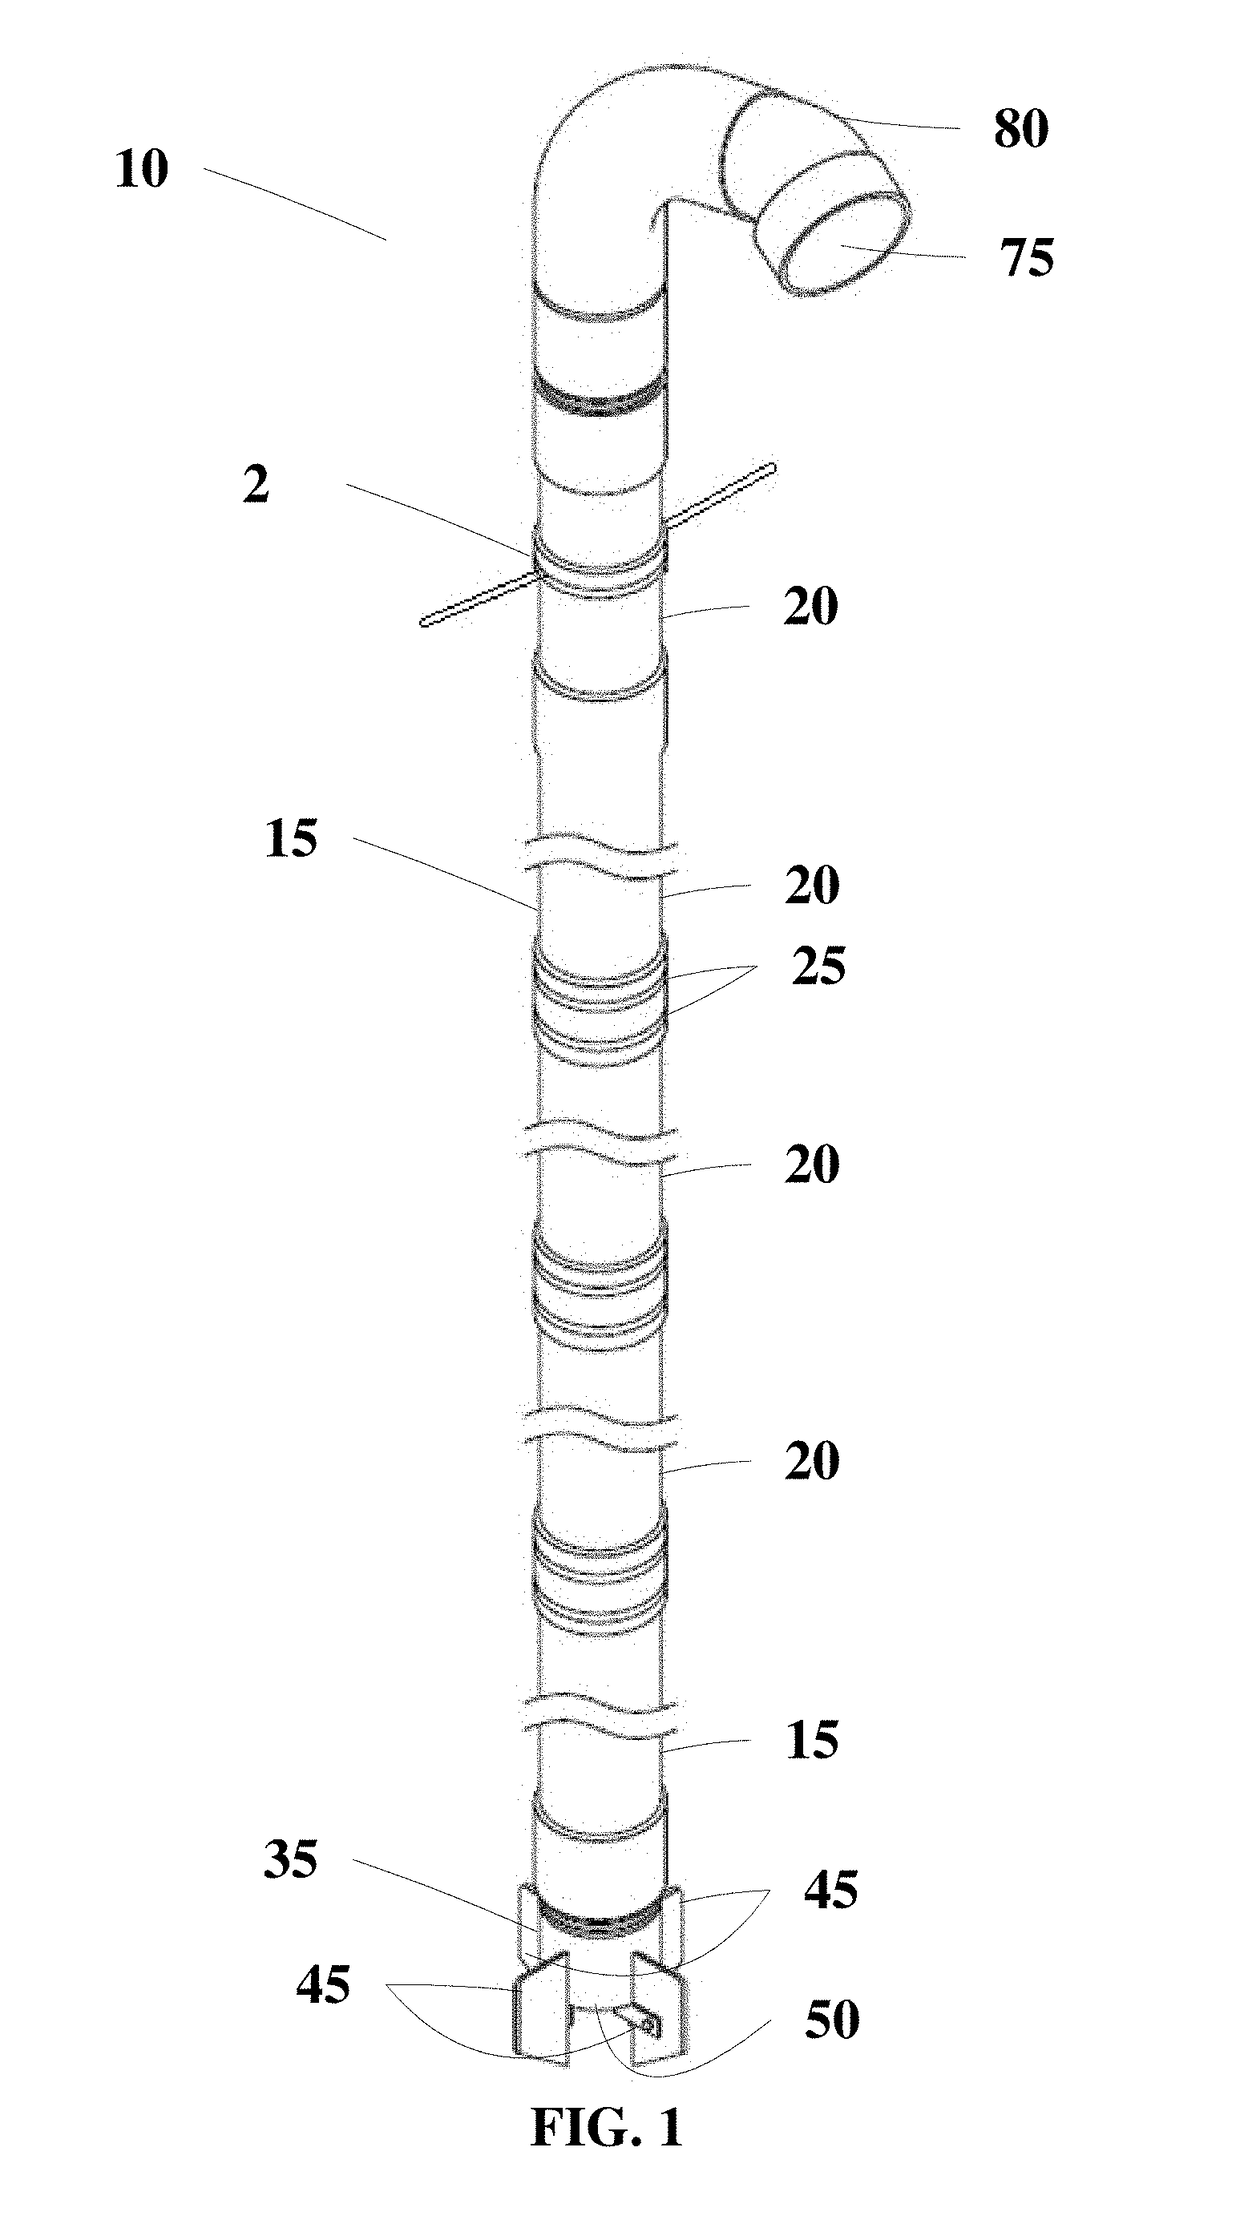 Well drilling apparatus and method of use